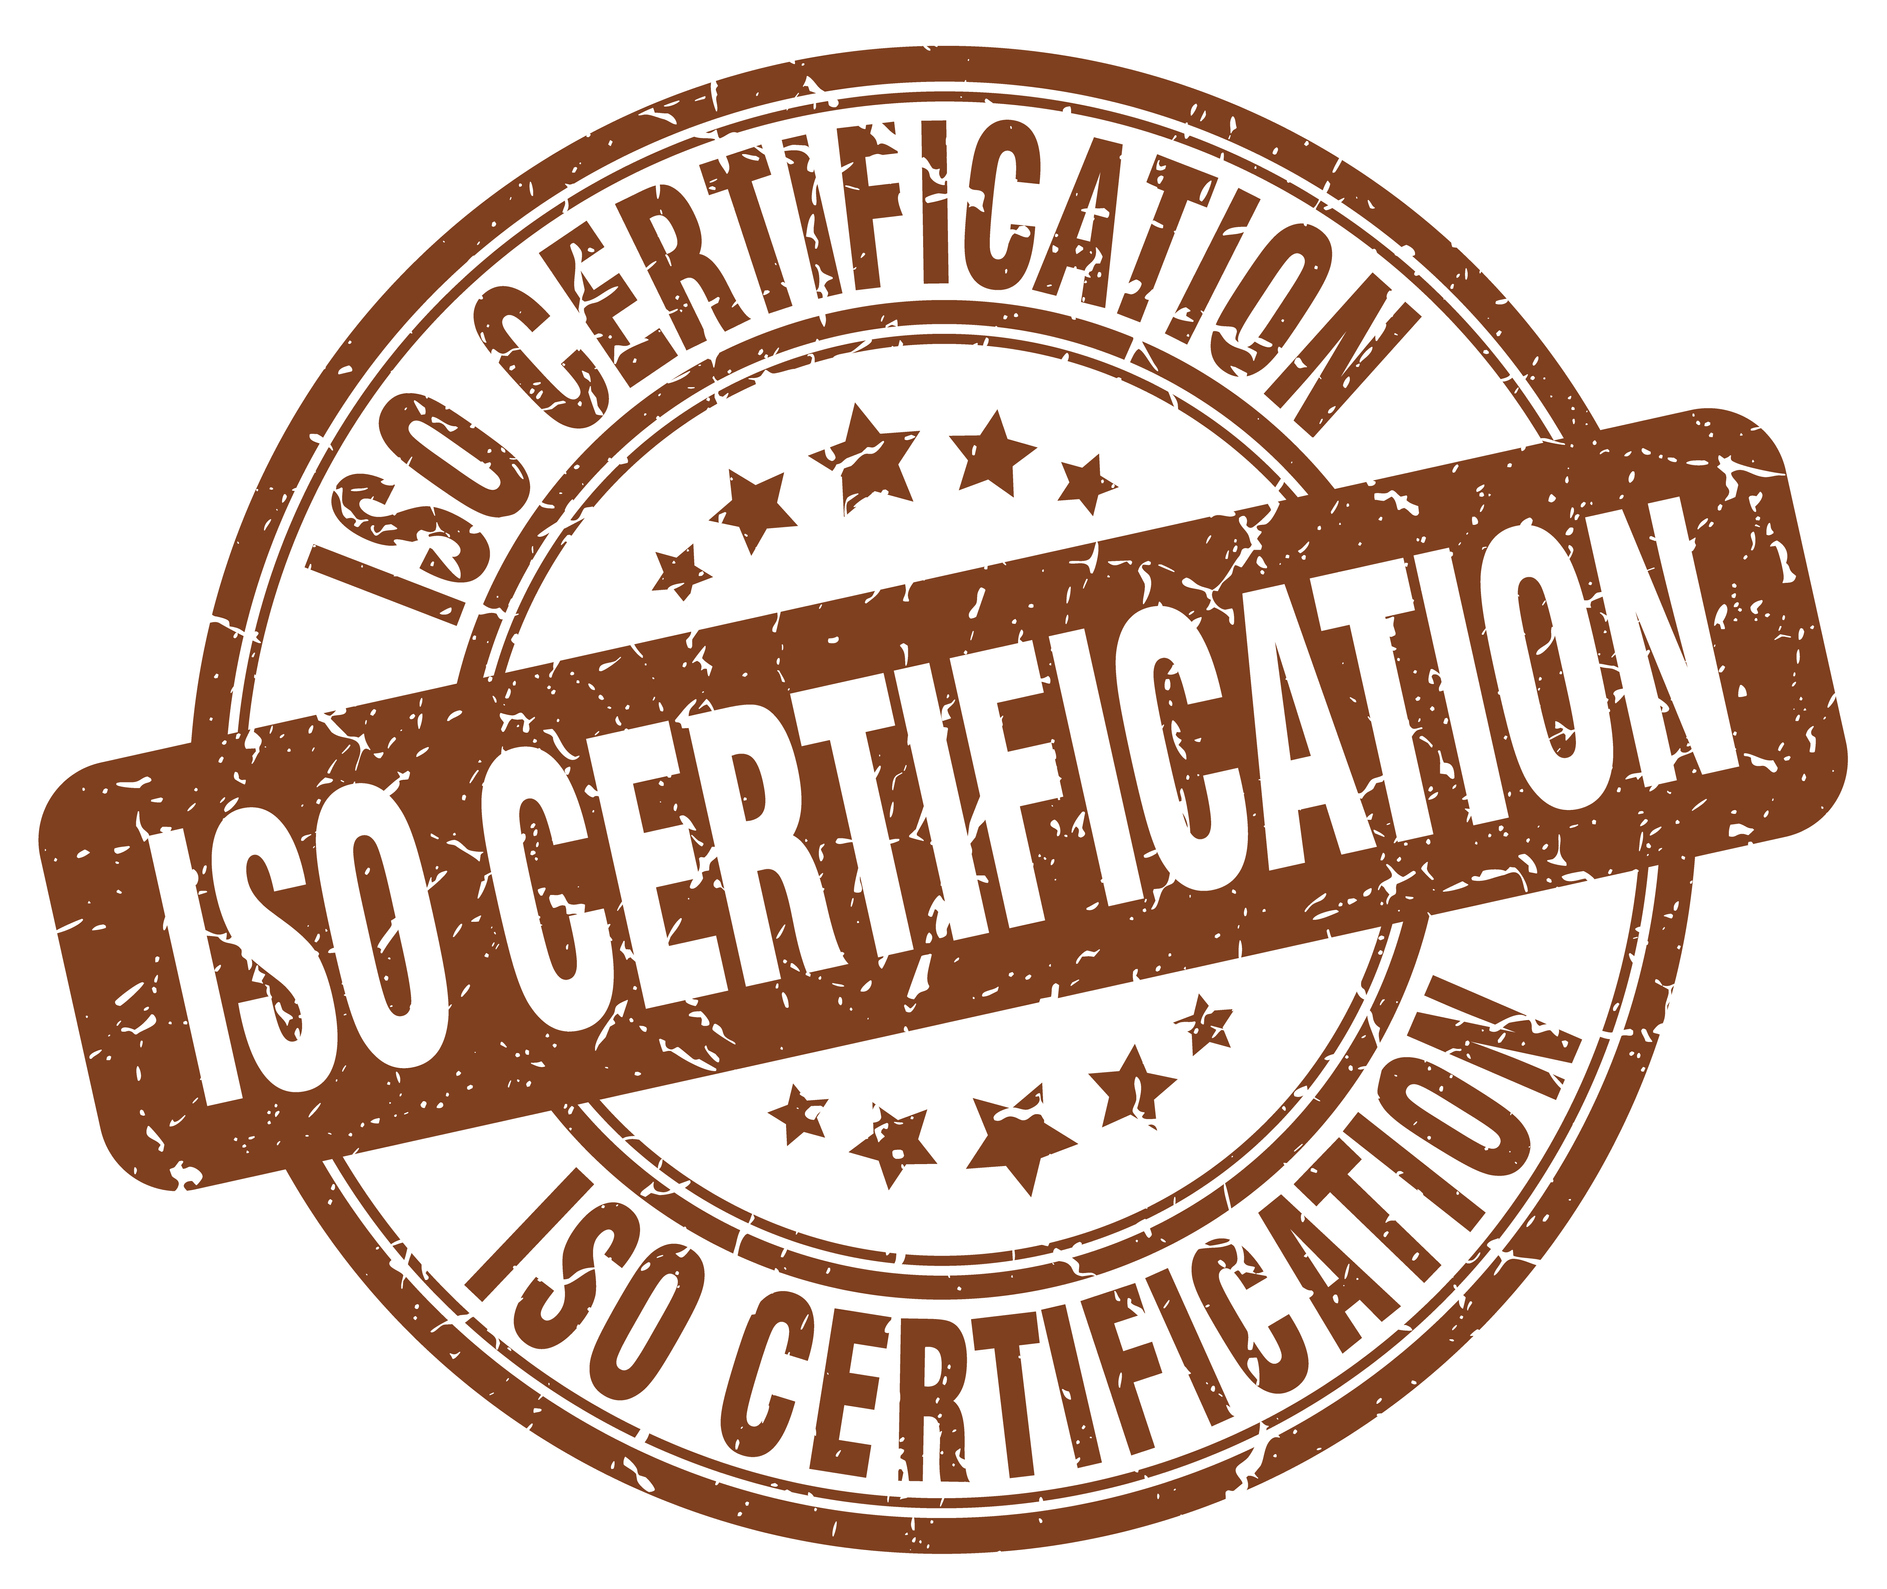 iso certification brown grunge stamp